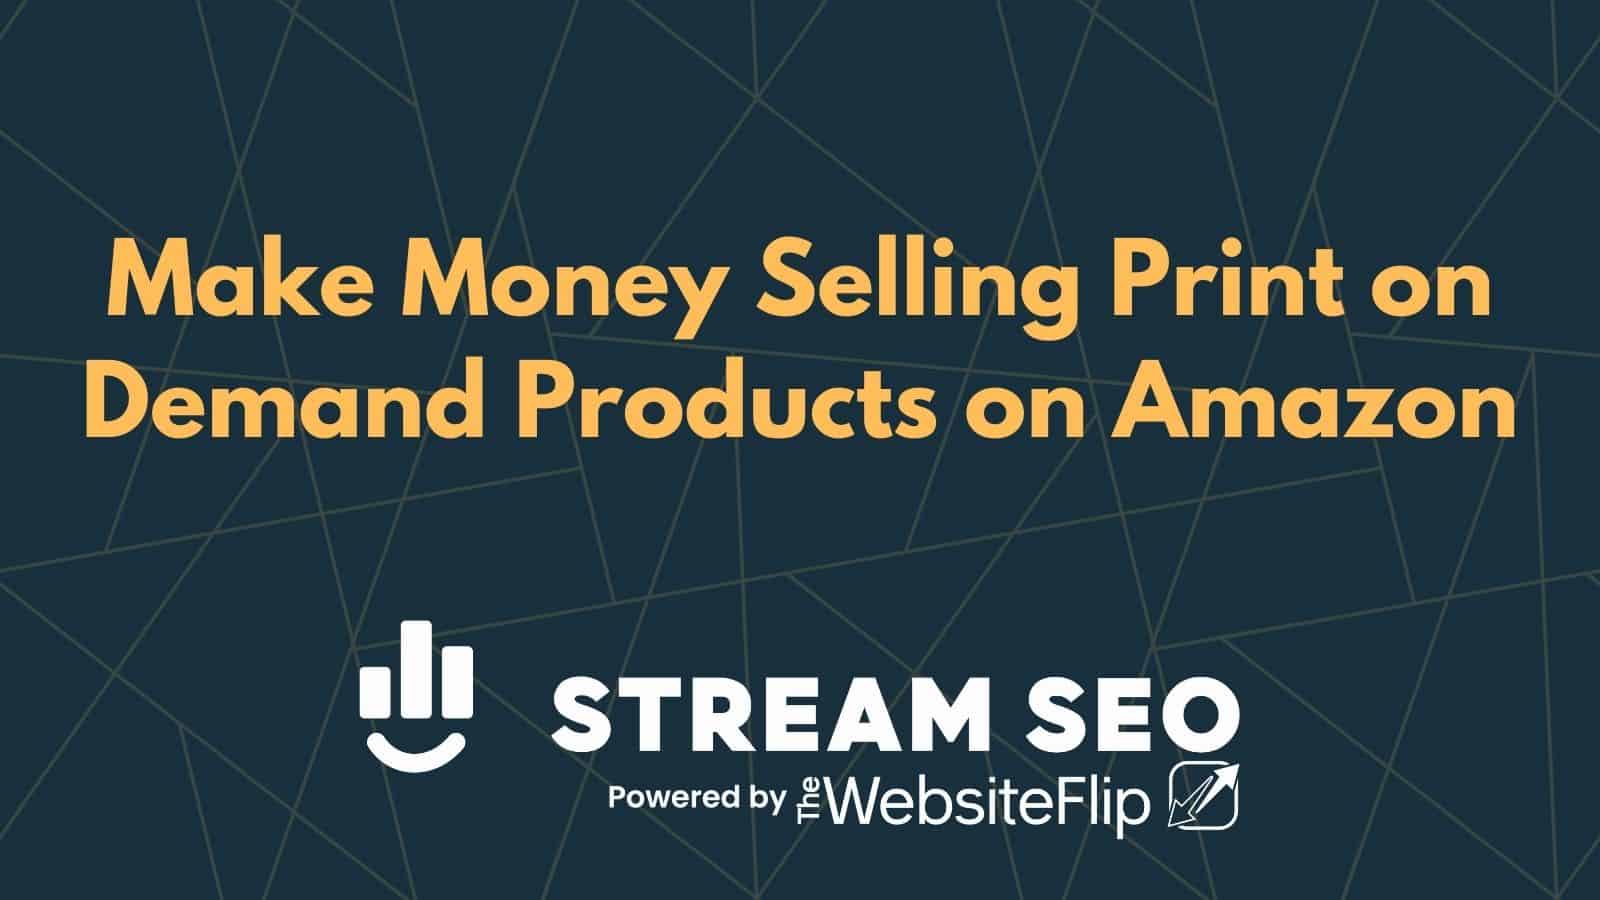 Make Money Selling Print on Demand Products on Amazon